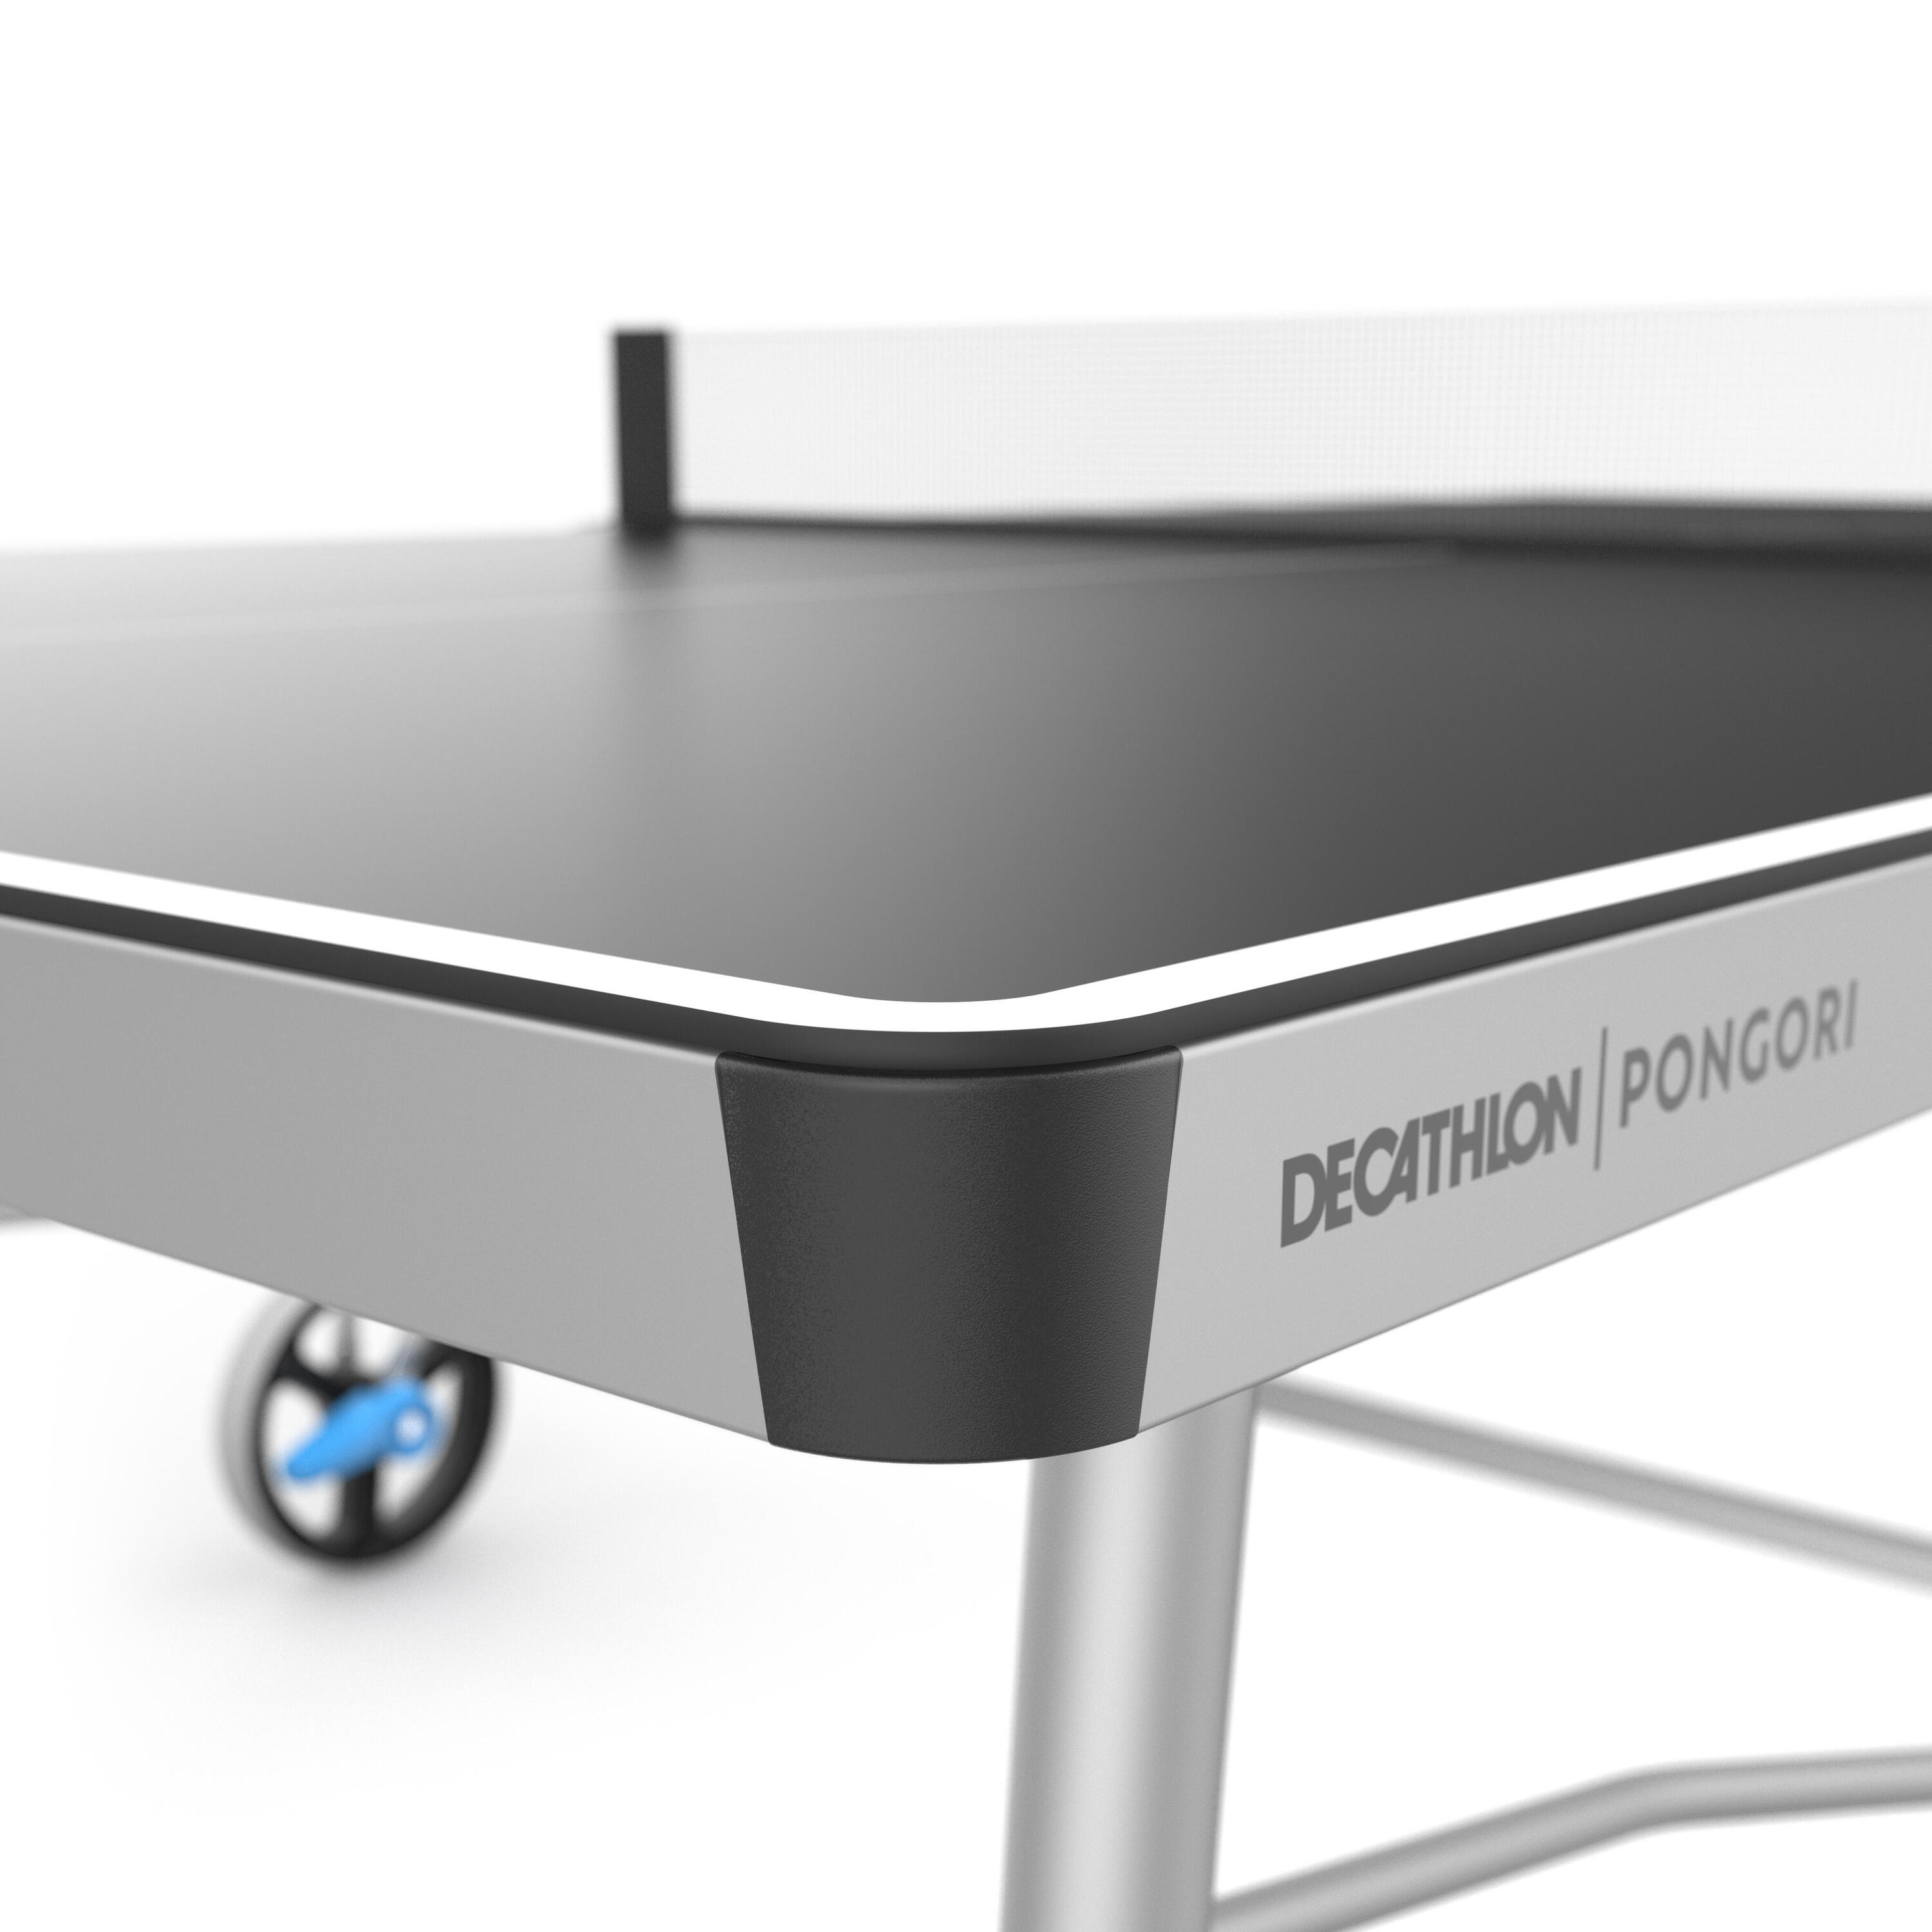 Outdoor Table Tennis Table PPT 900.2 - Grey 8/15